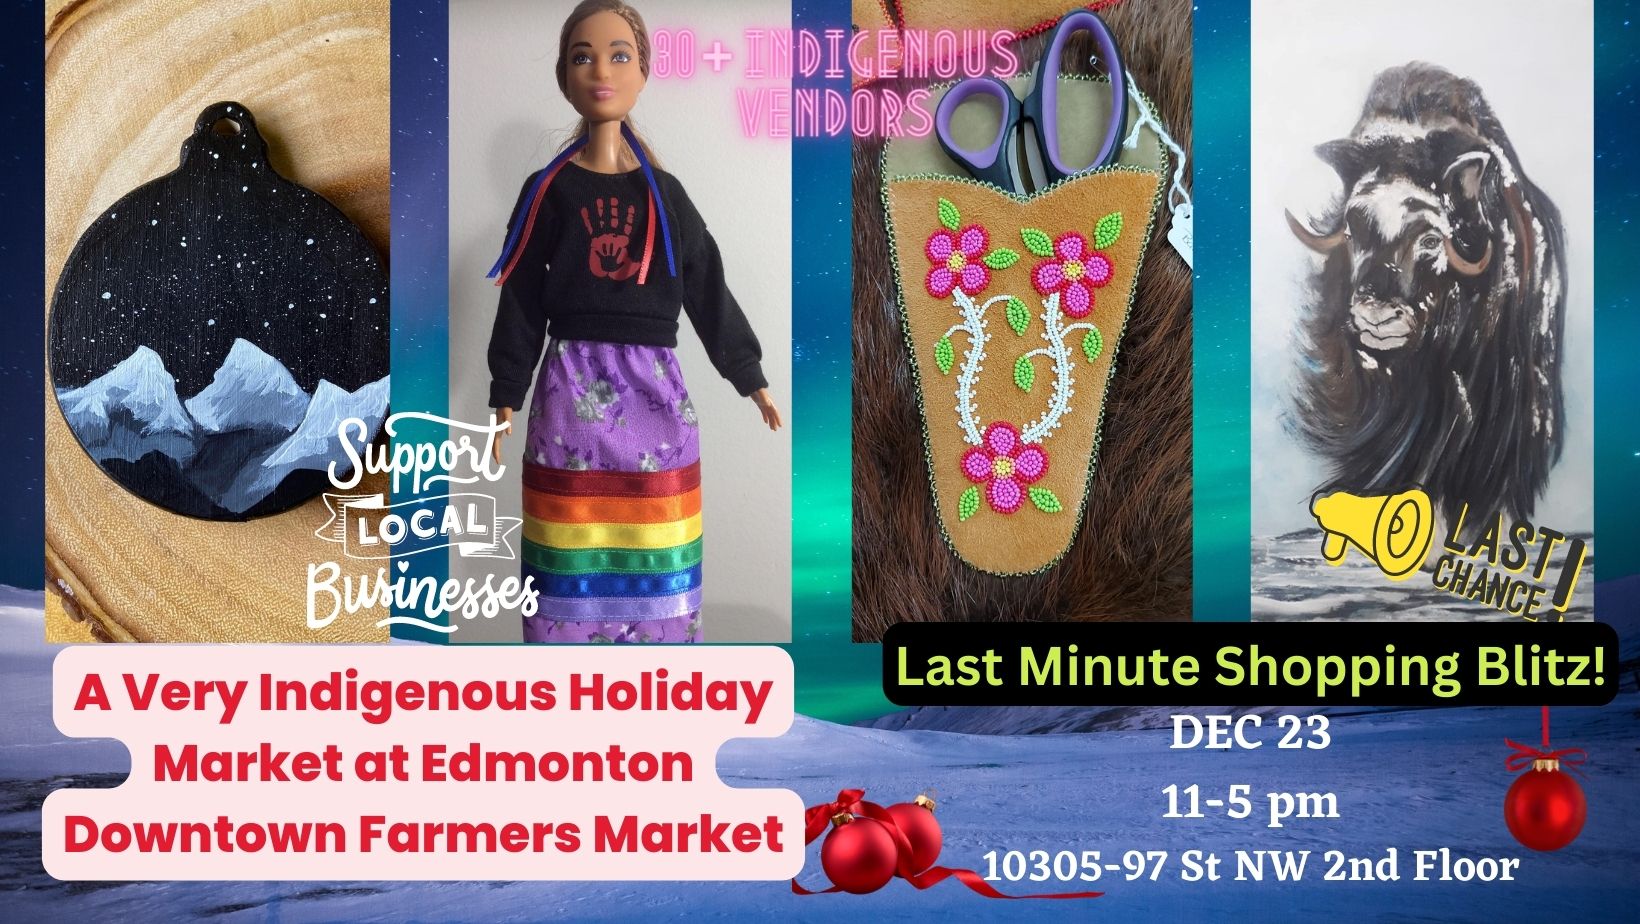 Featured image for “A Very Indigenous Holiday Market at Edmonton Downtown Farmers Market”